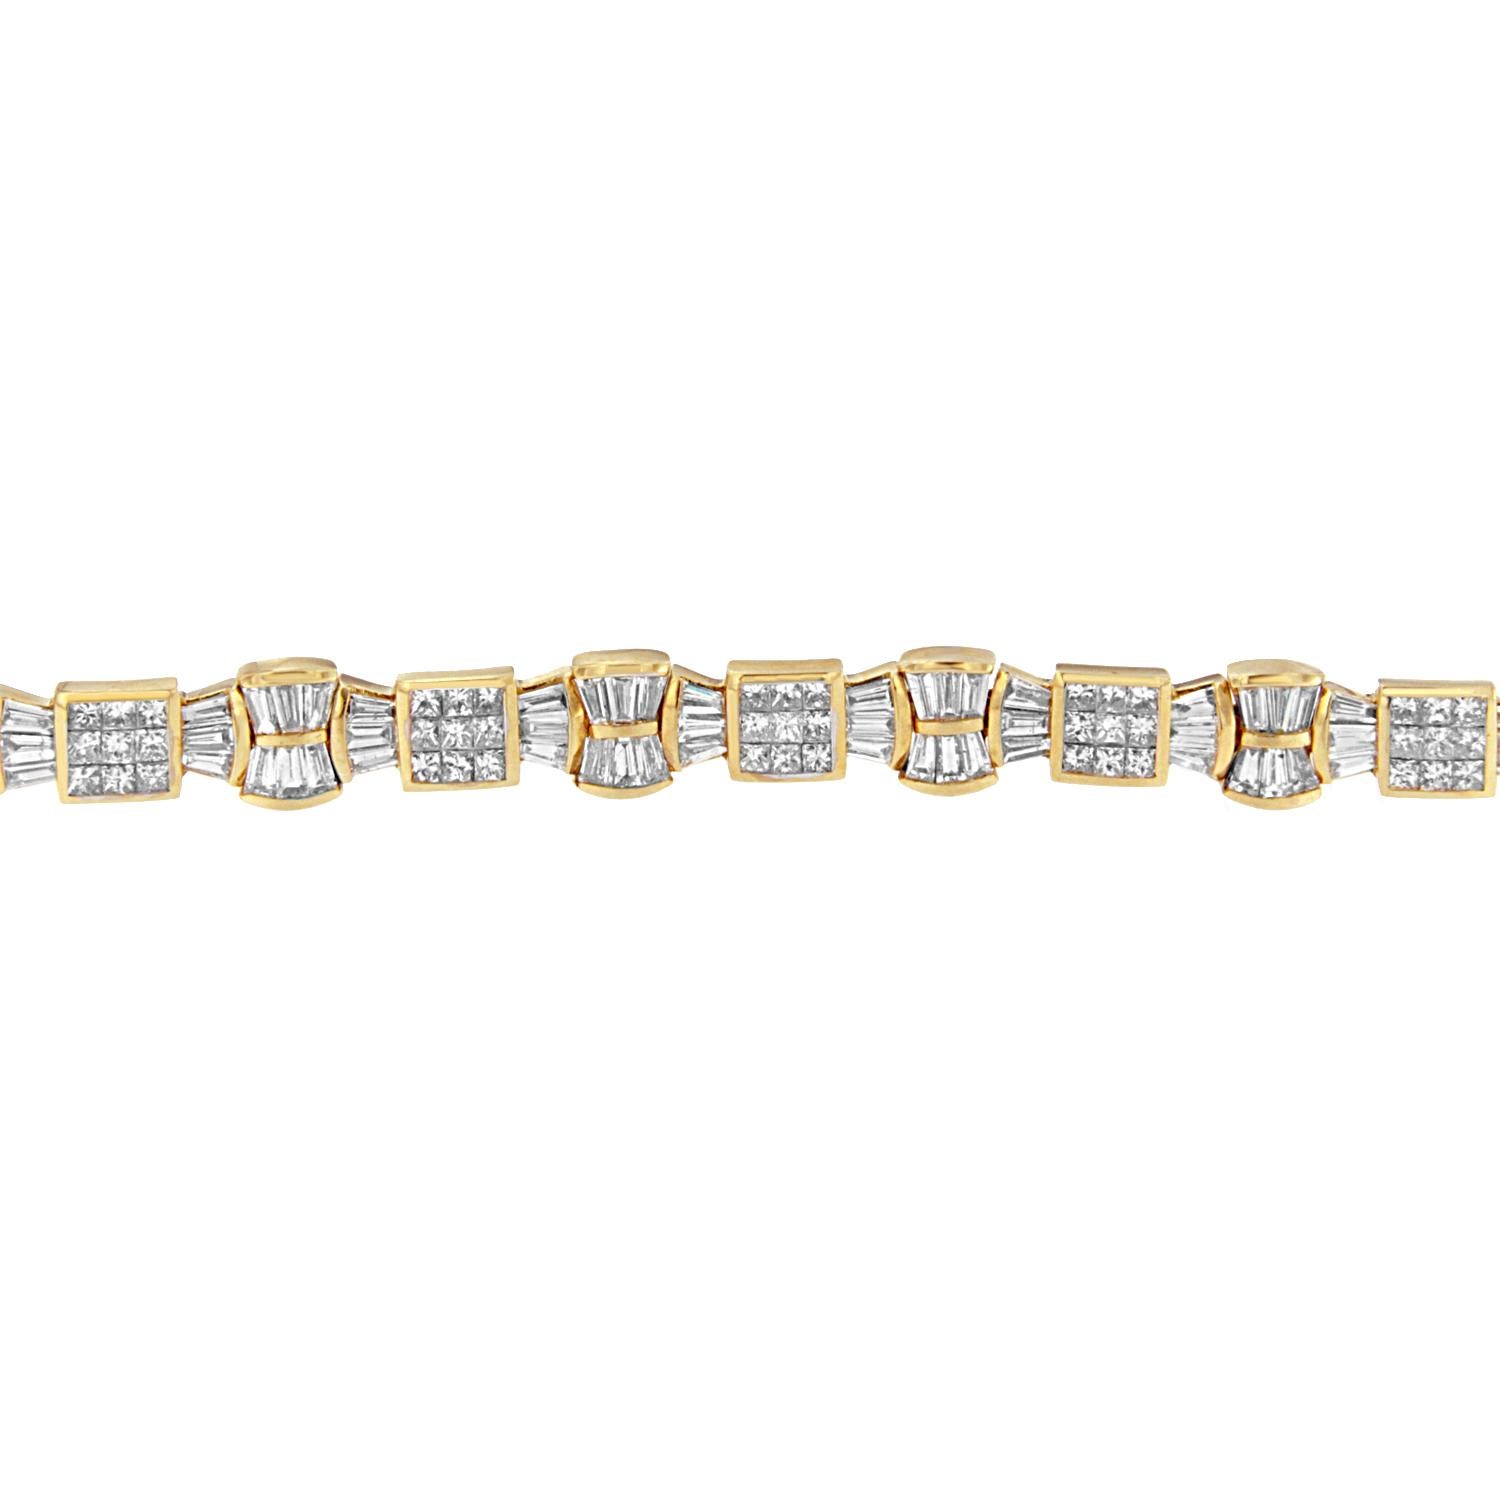 She has a love for sweet and delicate details. Surprise her with this ultra feminine bracelet, featuring shimmering 14 karat yellow gold links shaped like beautiful bows. Each one is adorned with dazzling princess cut or baguette diamonds to make